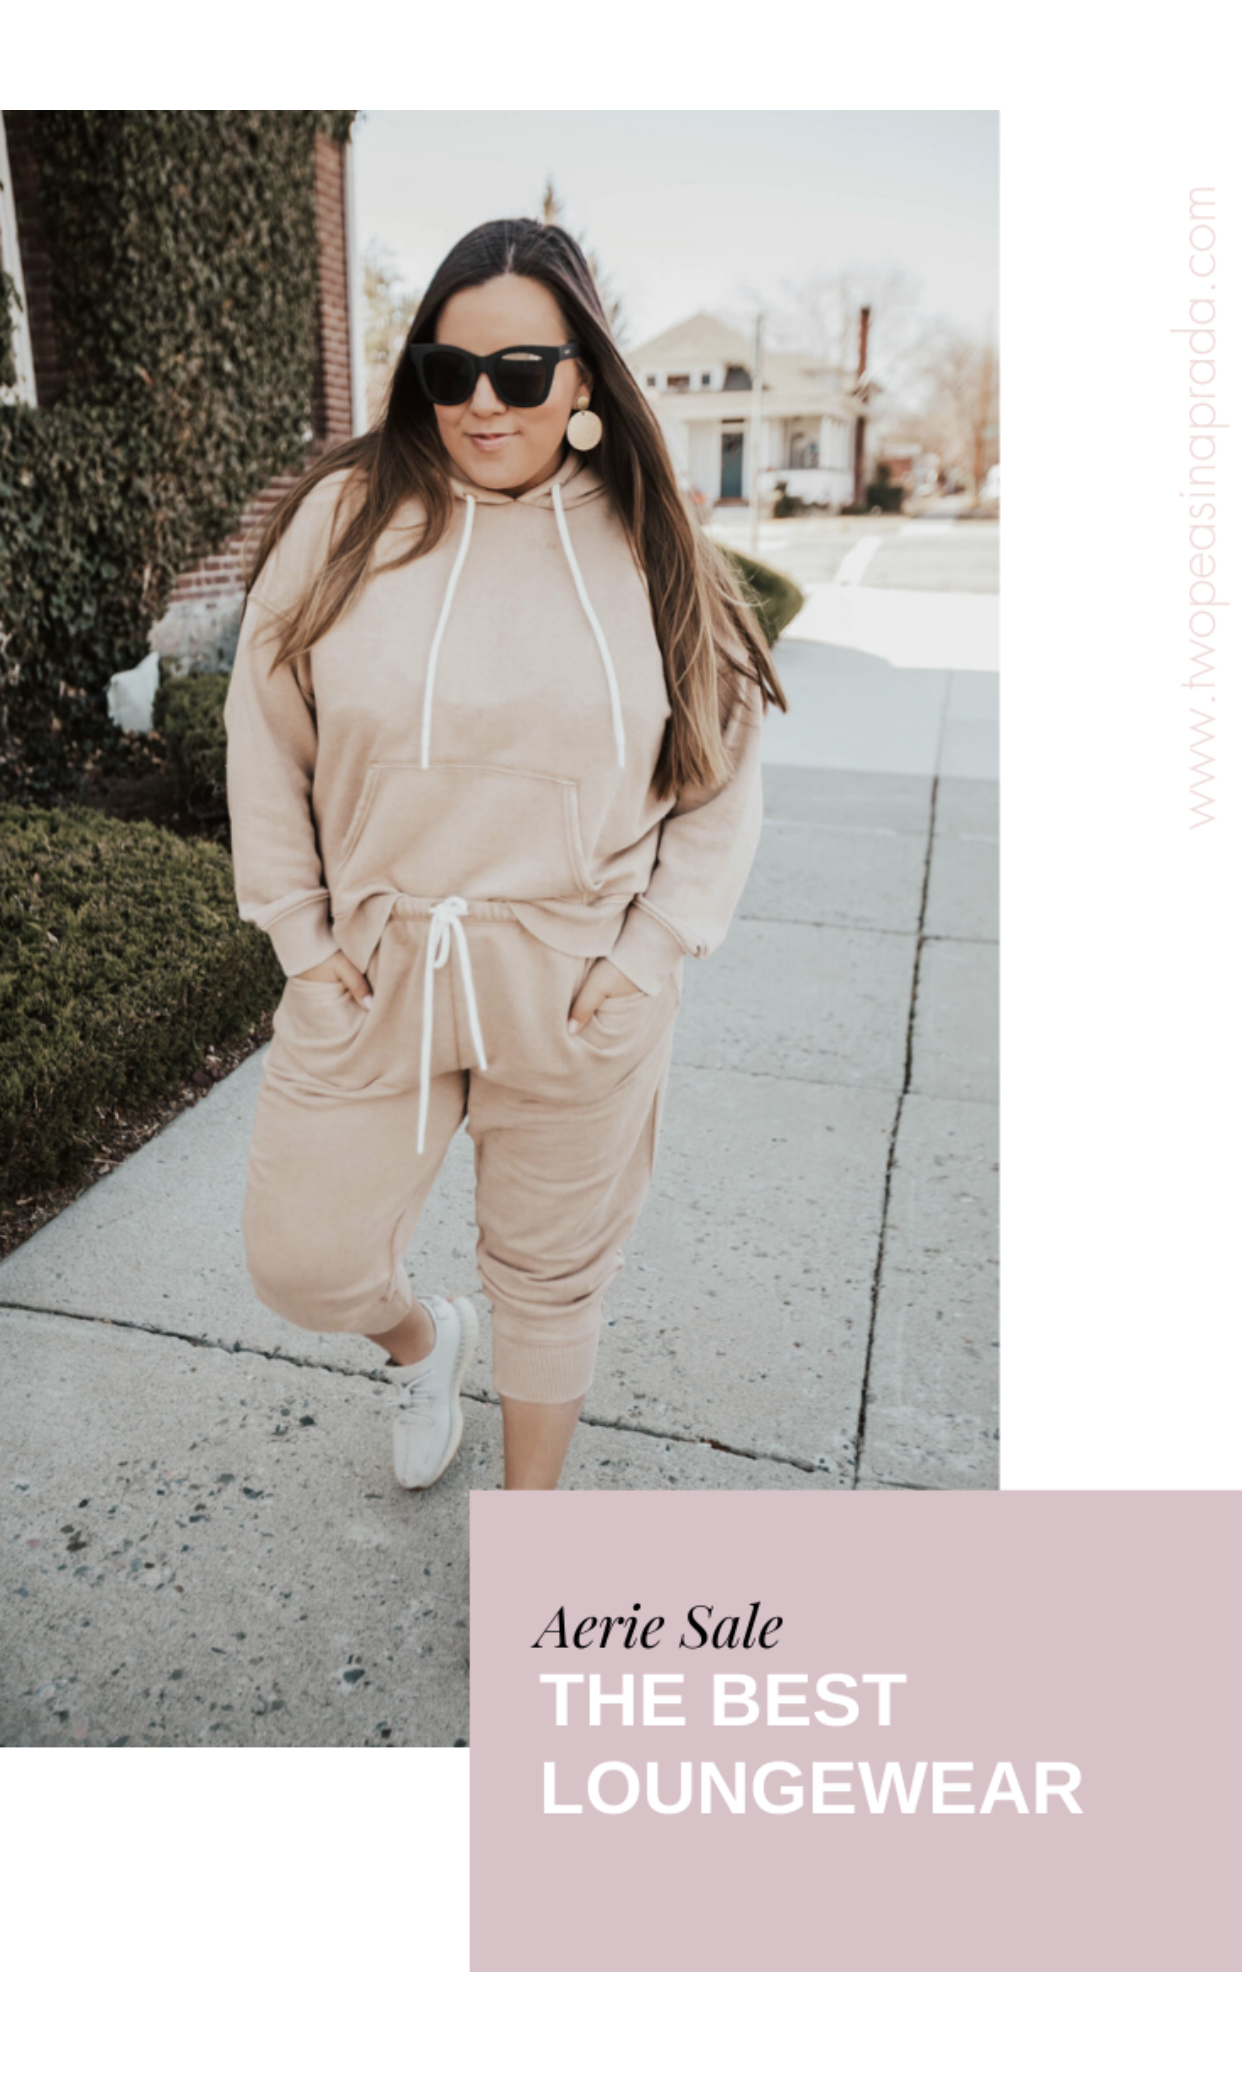 Reno blogger, Ashley Zeal, from Two Peas in a Prada shares her top picks from the Aerie Sale. Stock up on all the lounge wear!